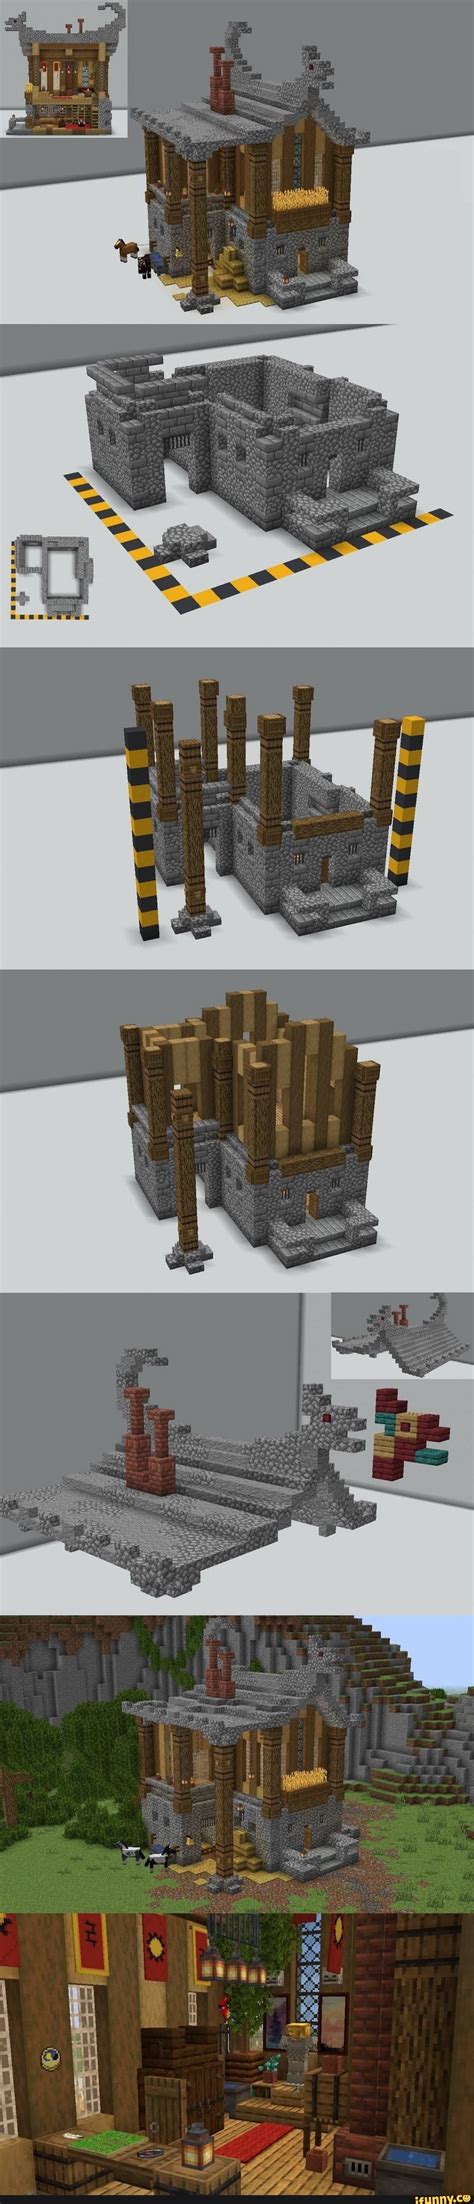 Several Different Views Of The Same Building In Minecraft Including